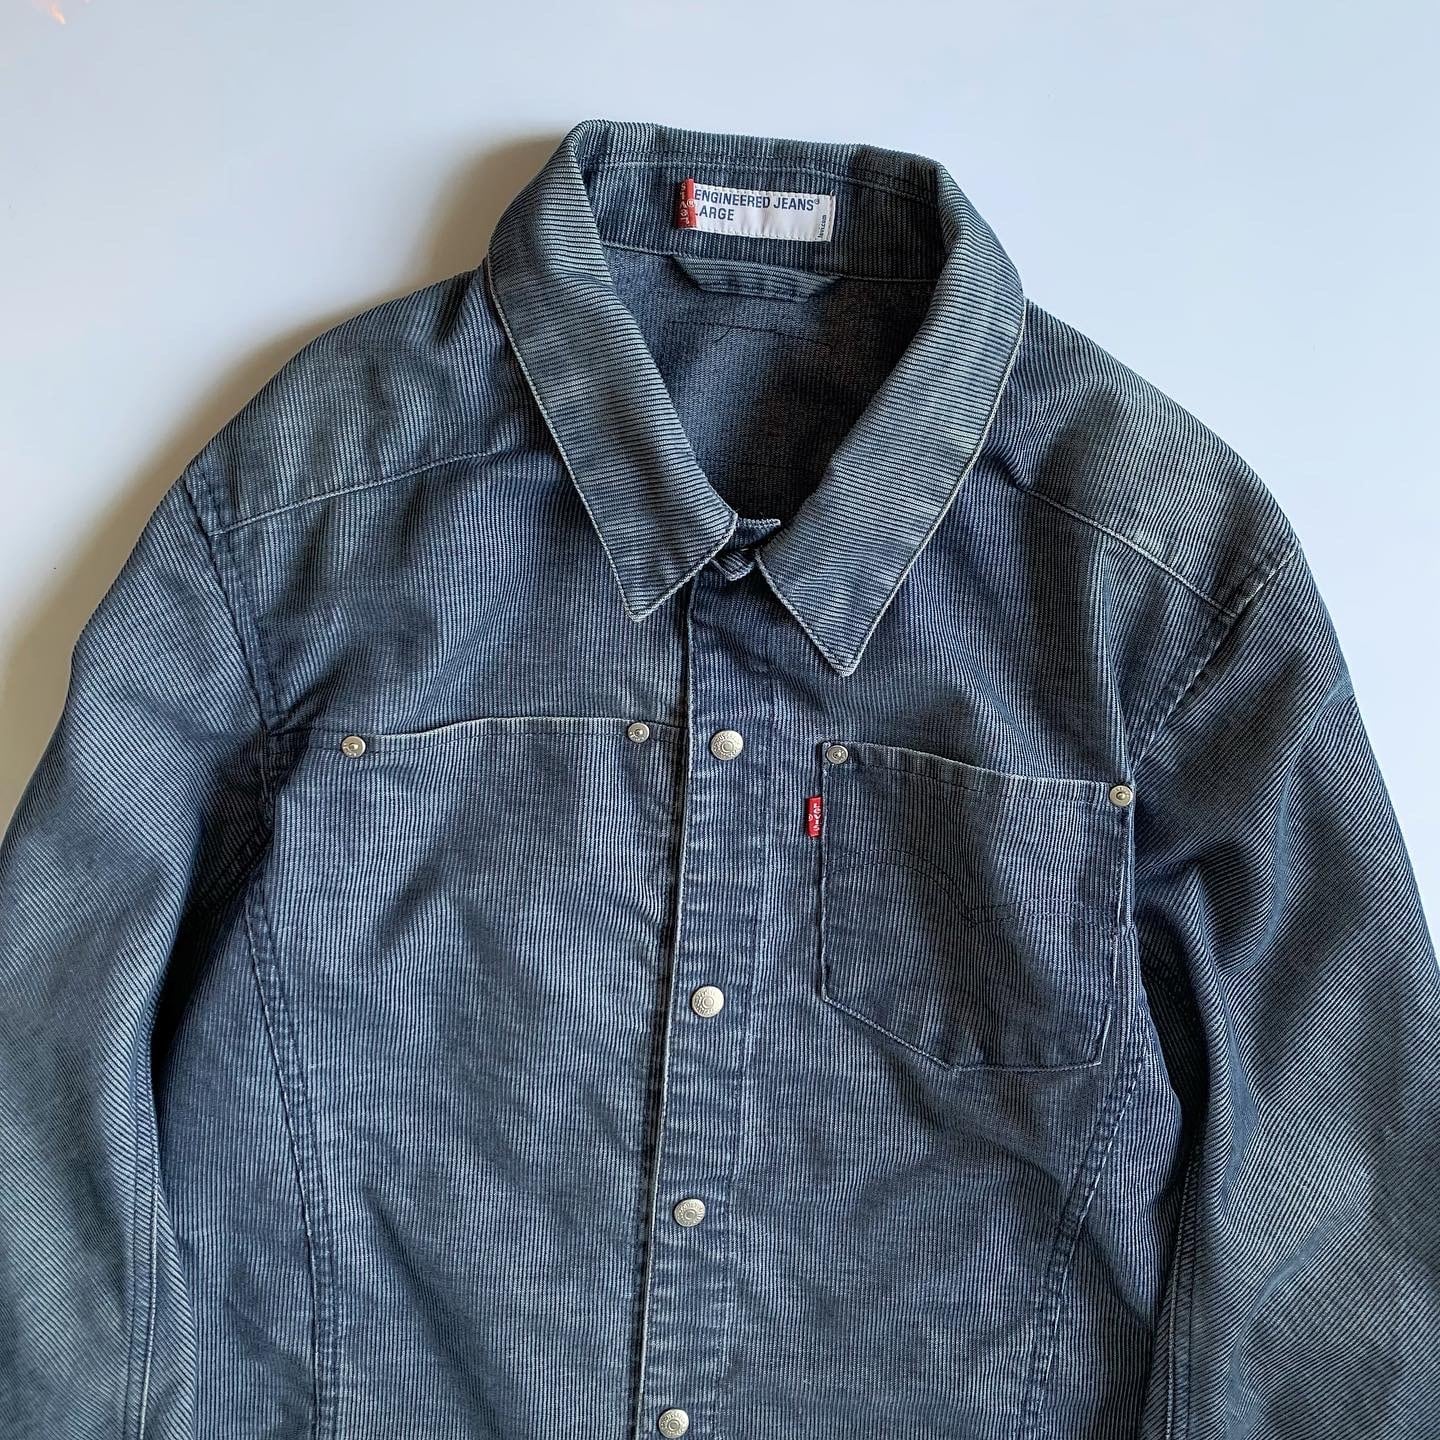 Levi's ENGINEERED JEANS tracker jacket | ON THE HILL powered by BASE